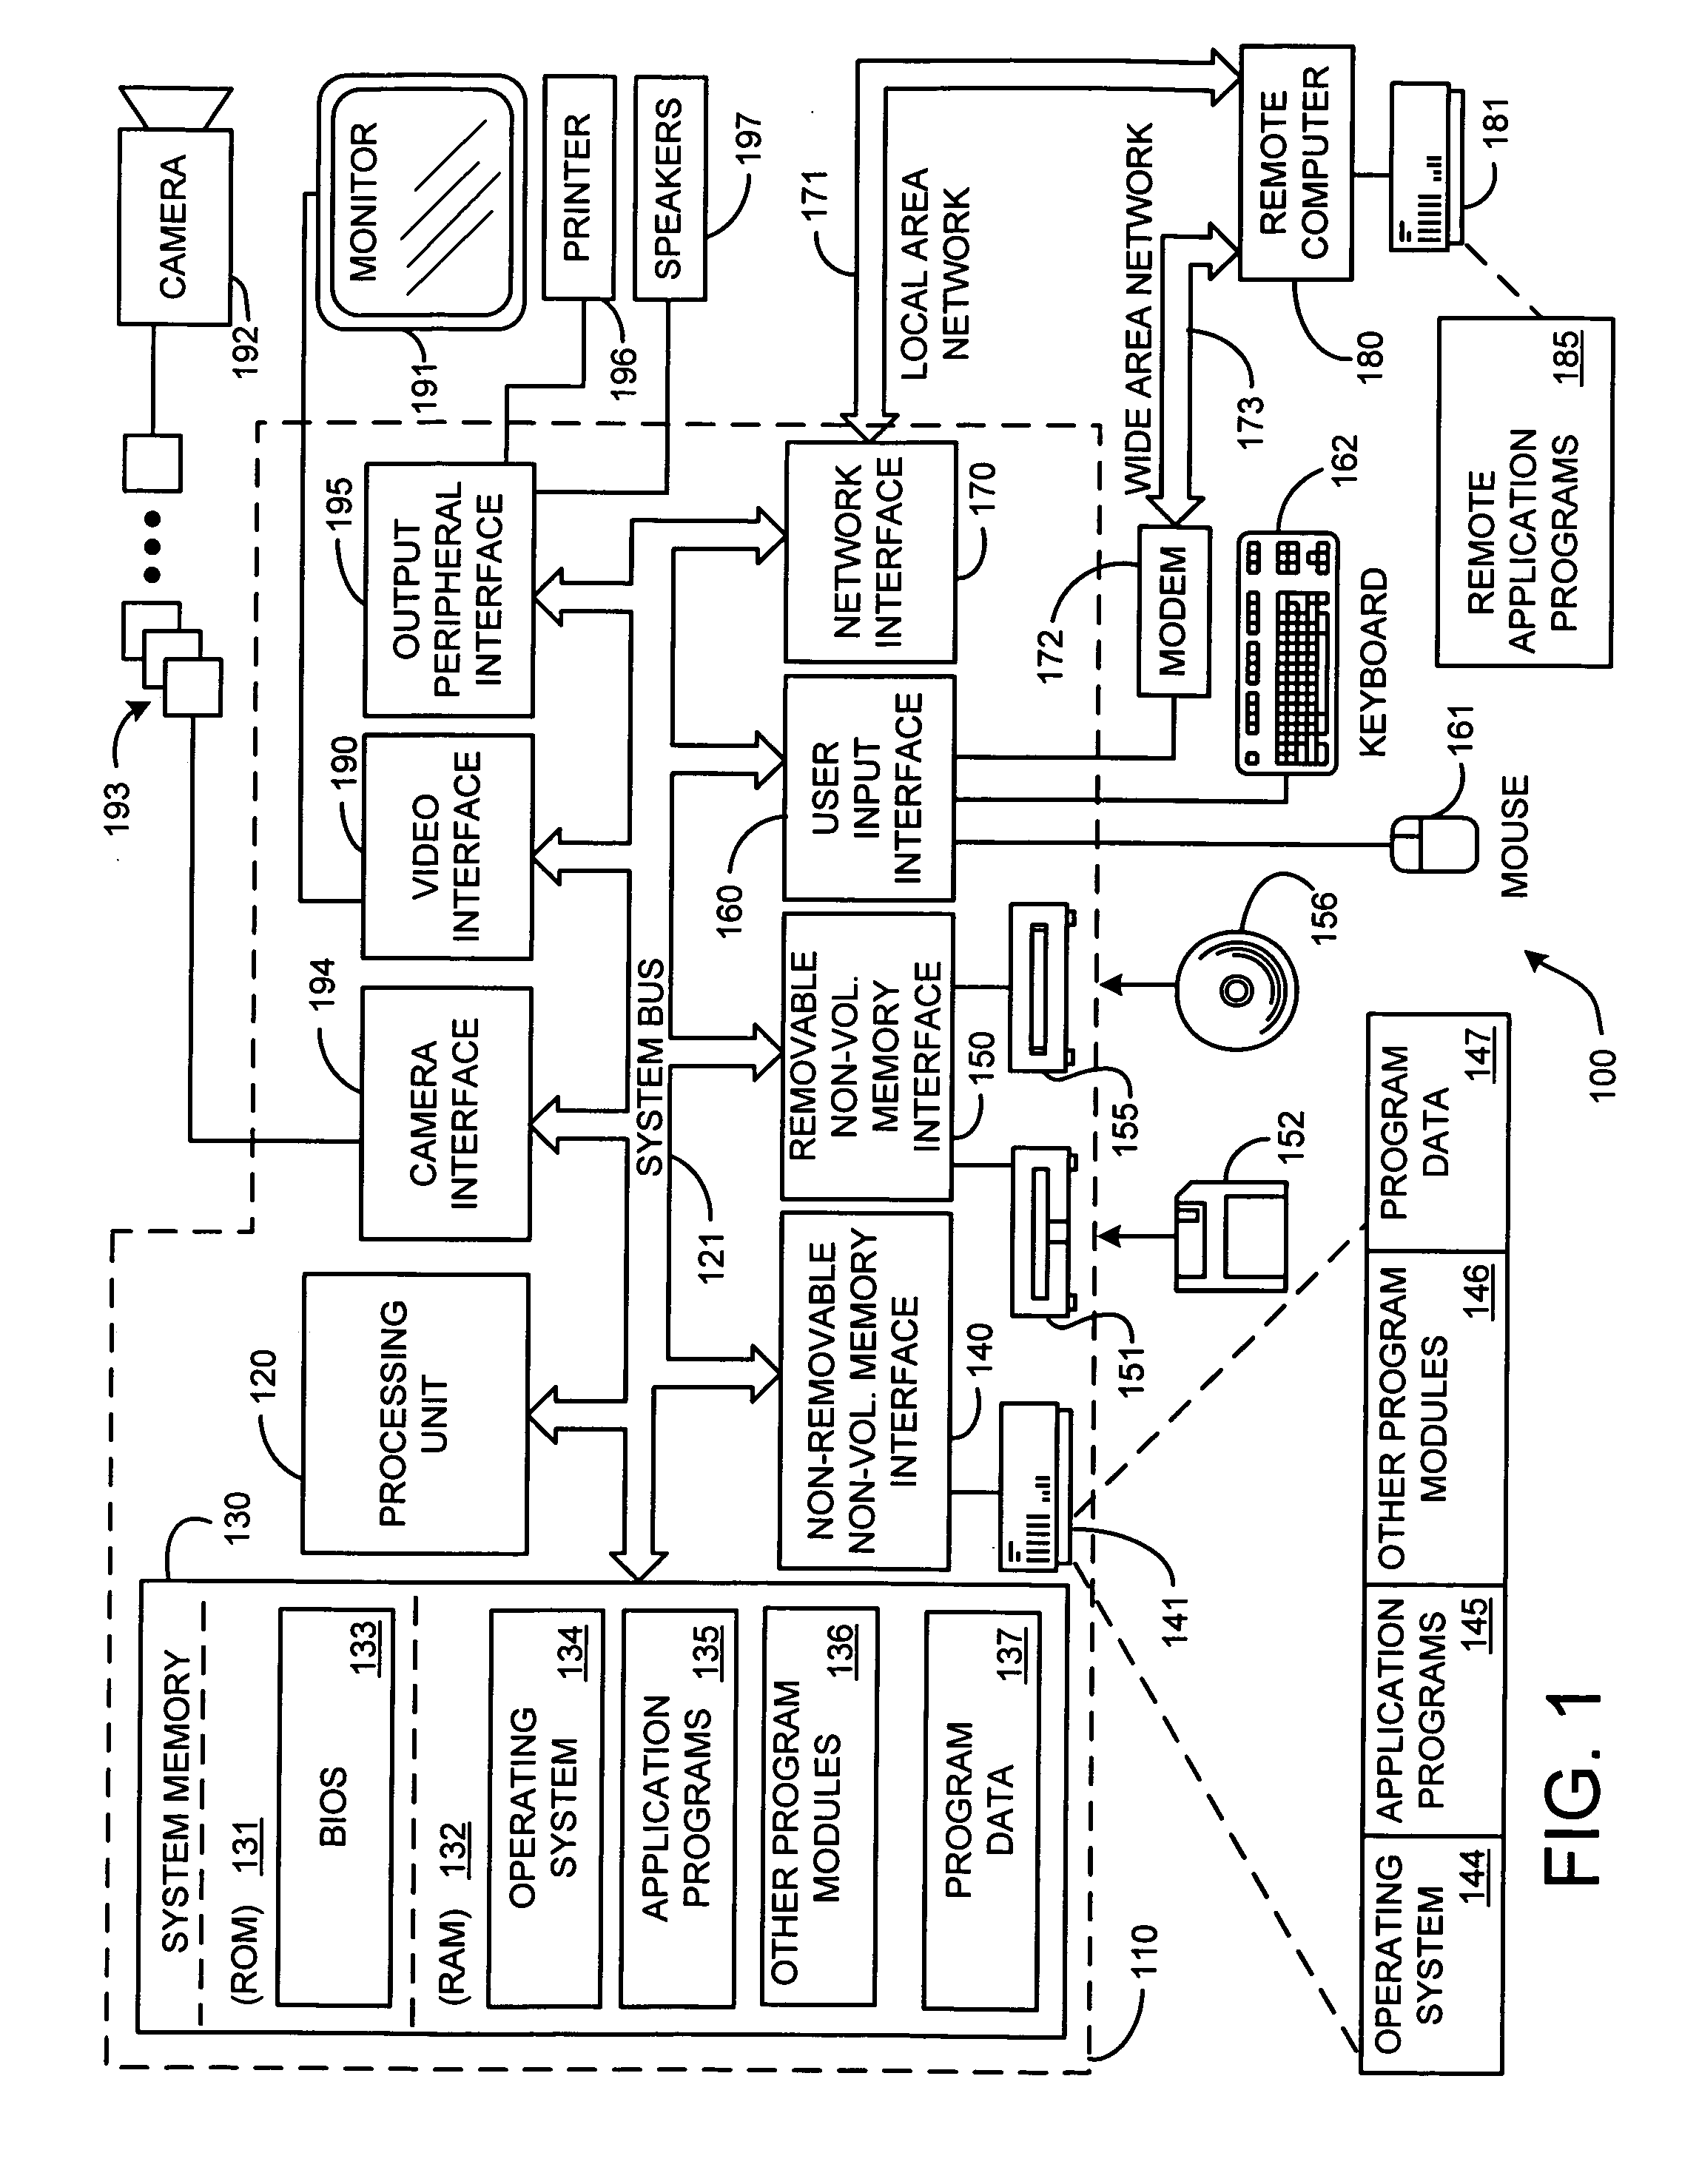 System and process for controlling the coding bit rate of streaming media data employing a limited number of supported coding bit rates